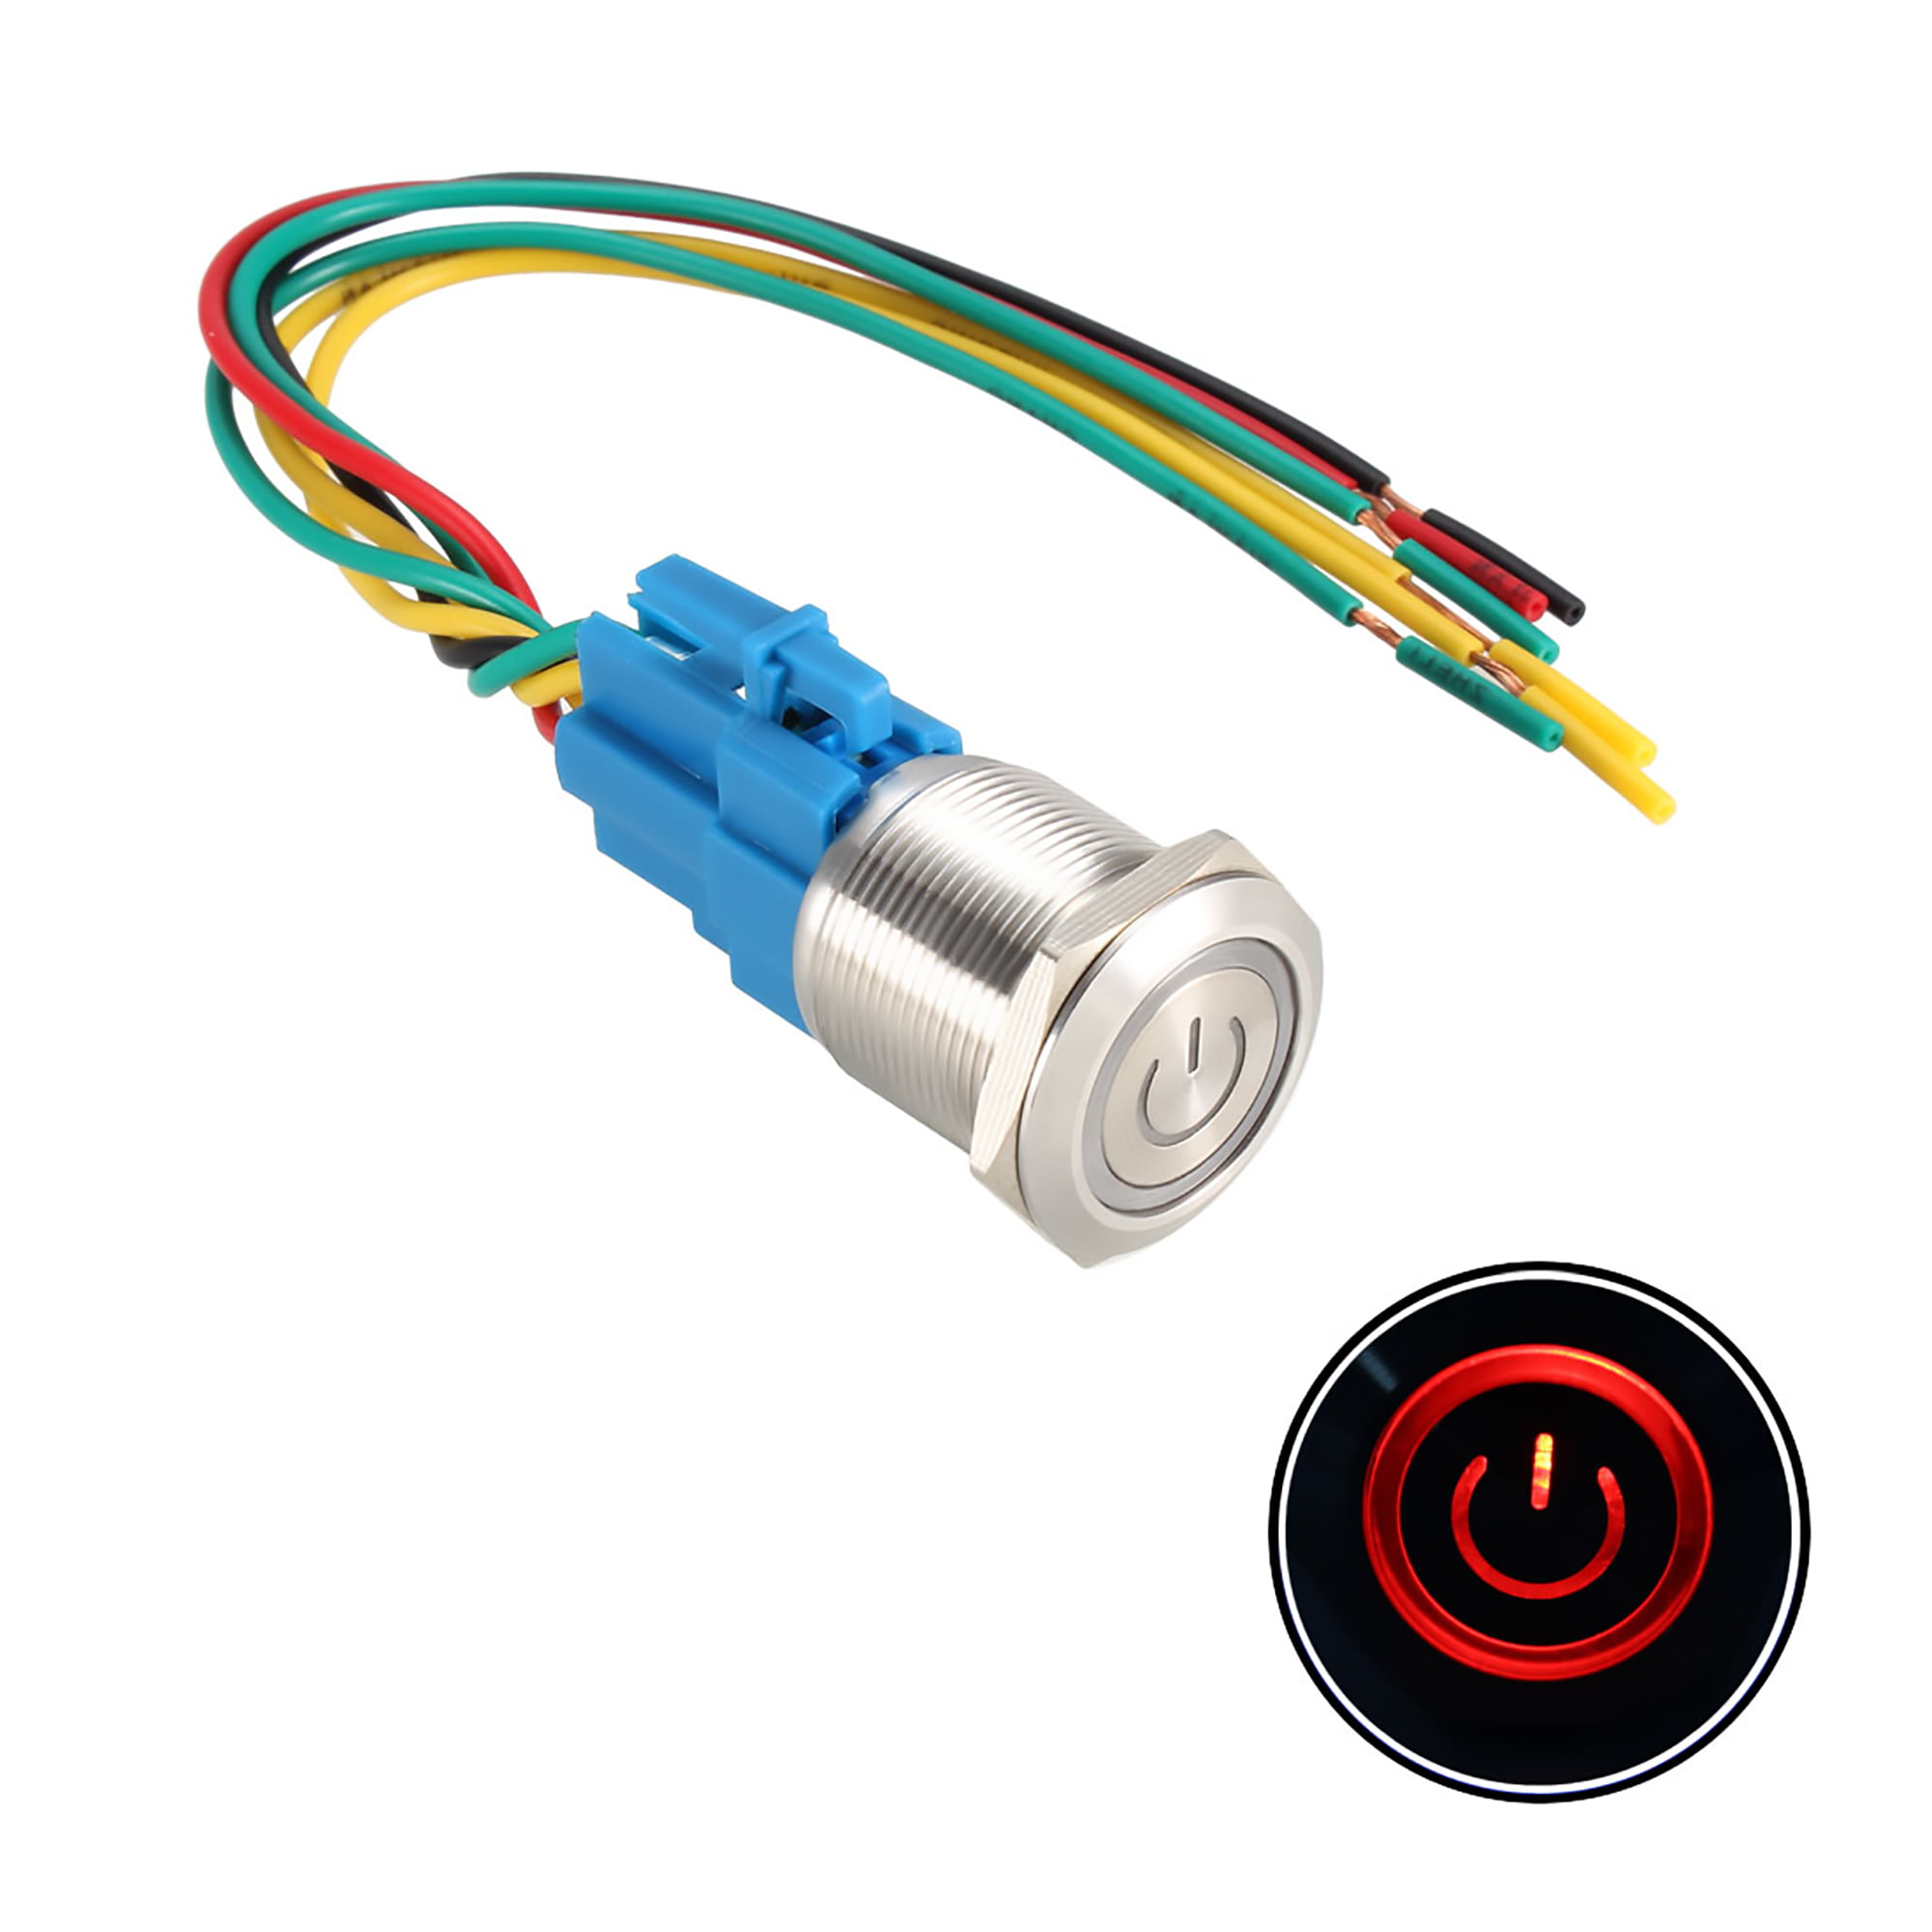 Details about   Latching Push Button Switch 22mm Mounting Dia 1NO 1NC 12V Red LED w Socket Plug 